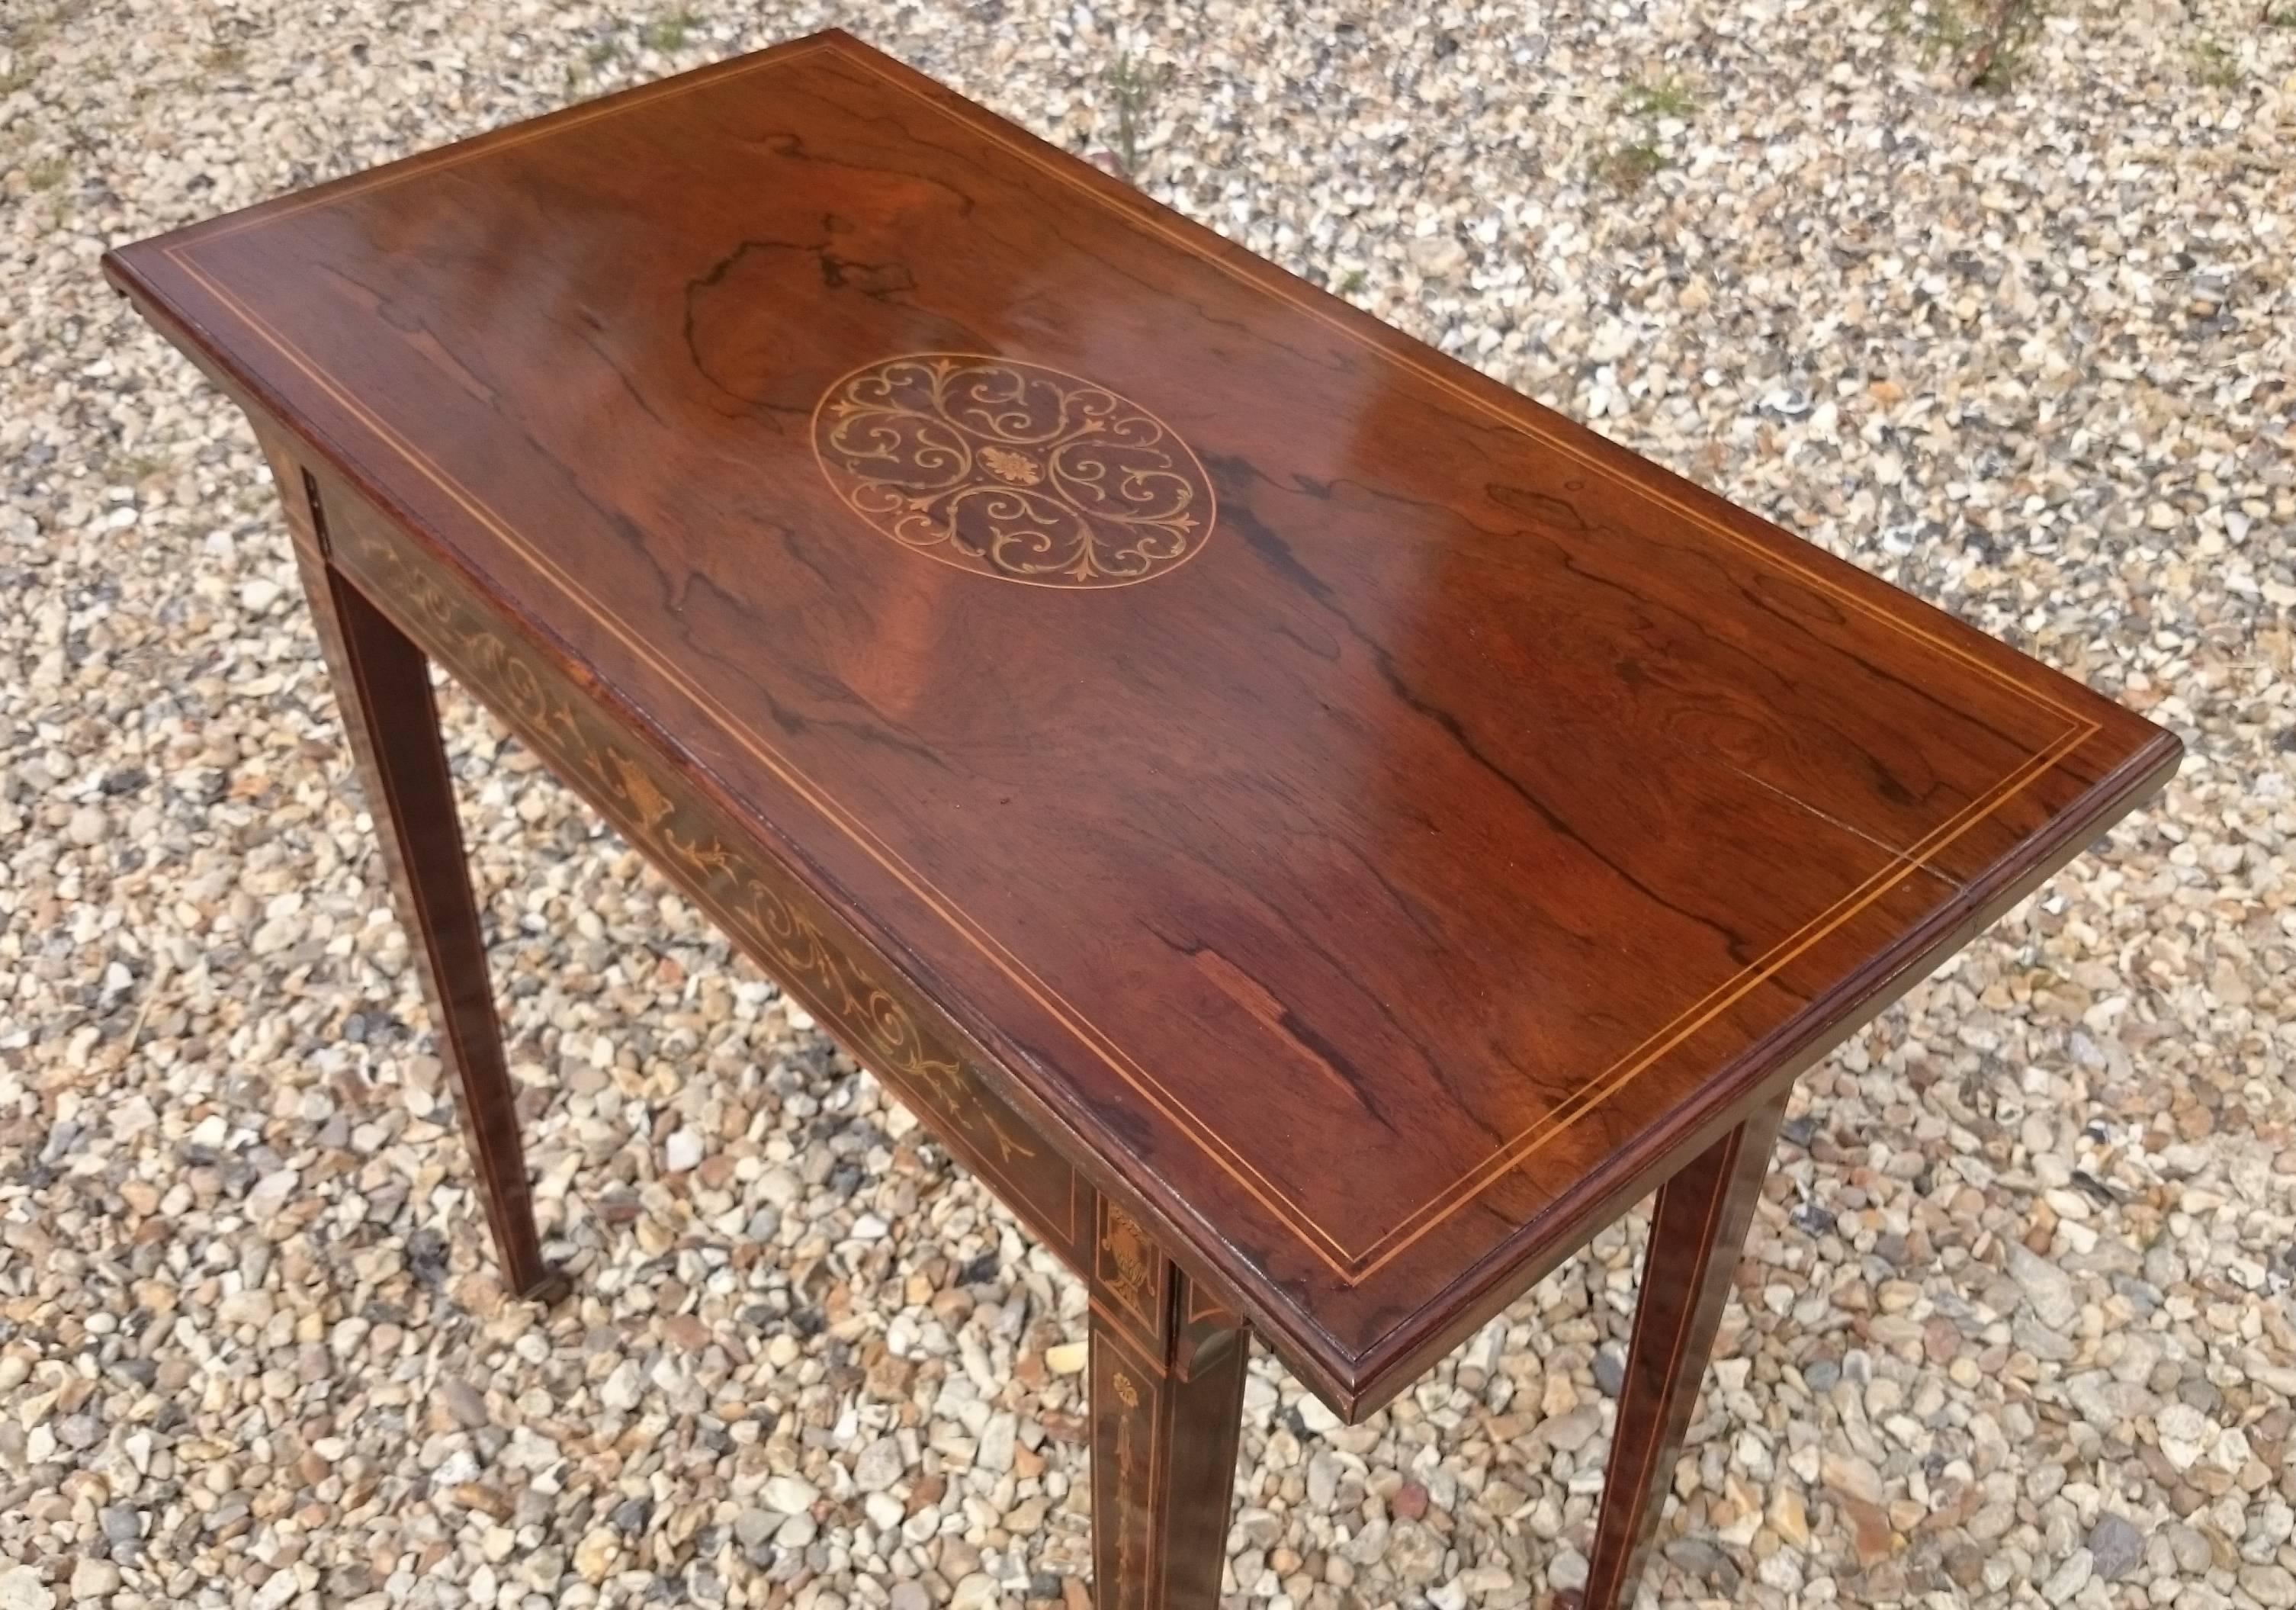 British Early 20th Century Antique Card Table with Fine Inlaid Decoration